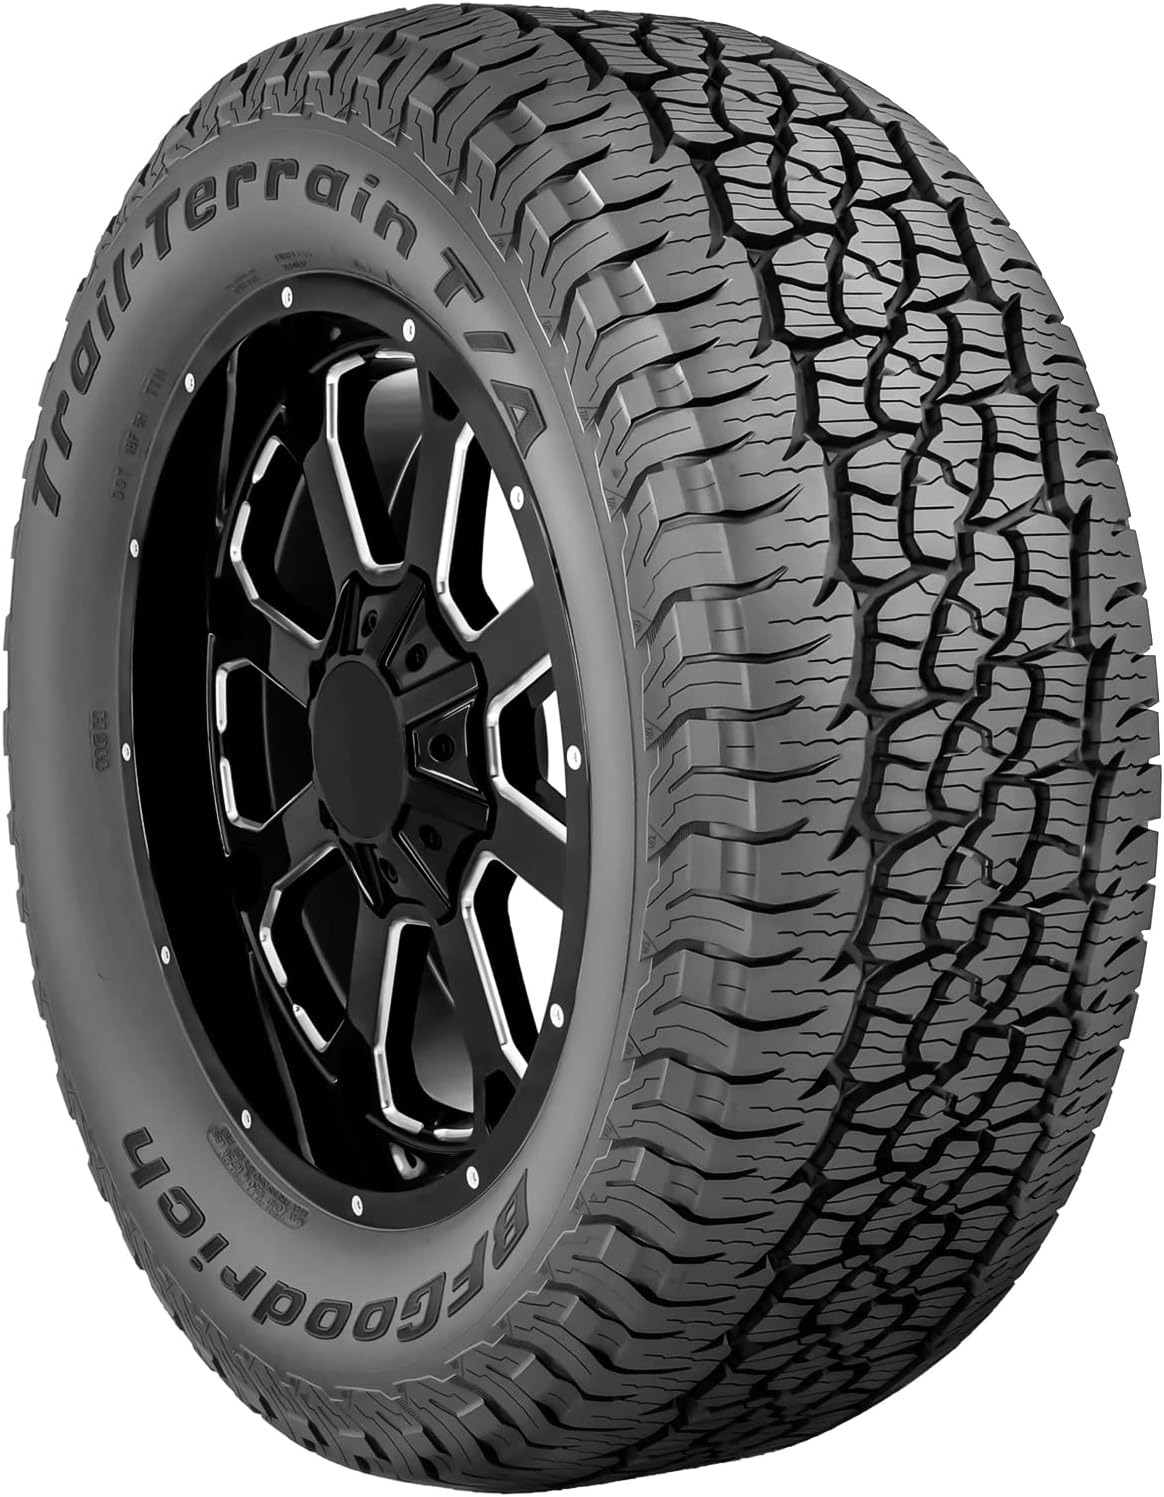 Trail-Terrain T/A on and Off-Road Tire for Light Trucks, Suvs, and Crossovers, 2